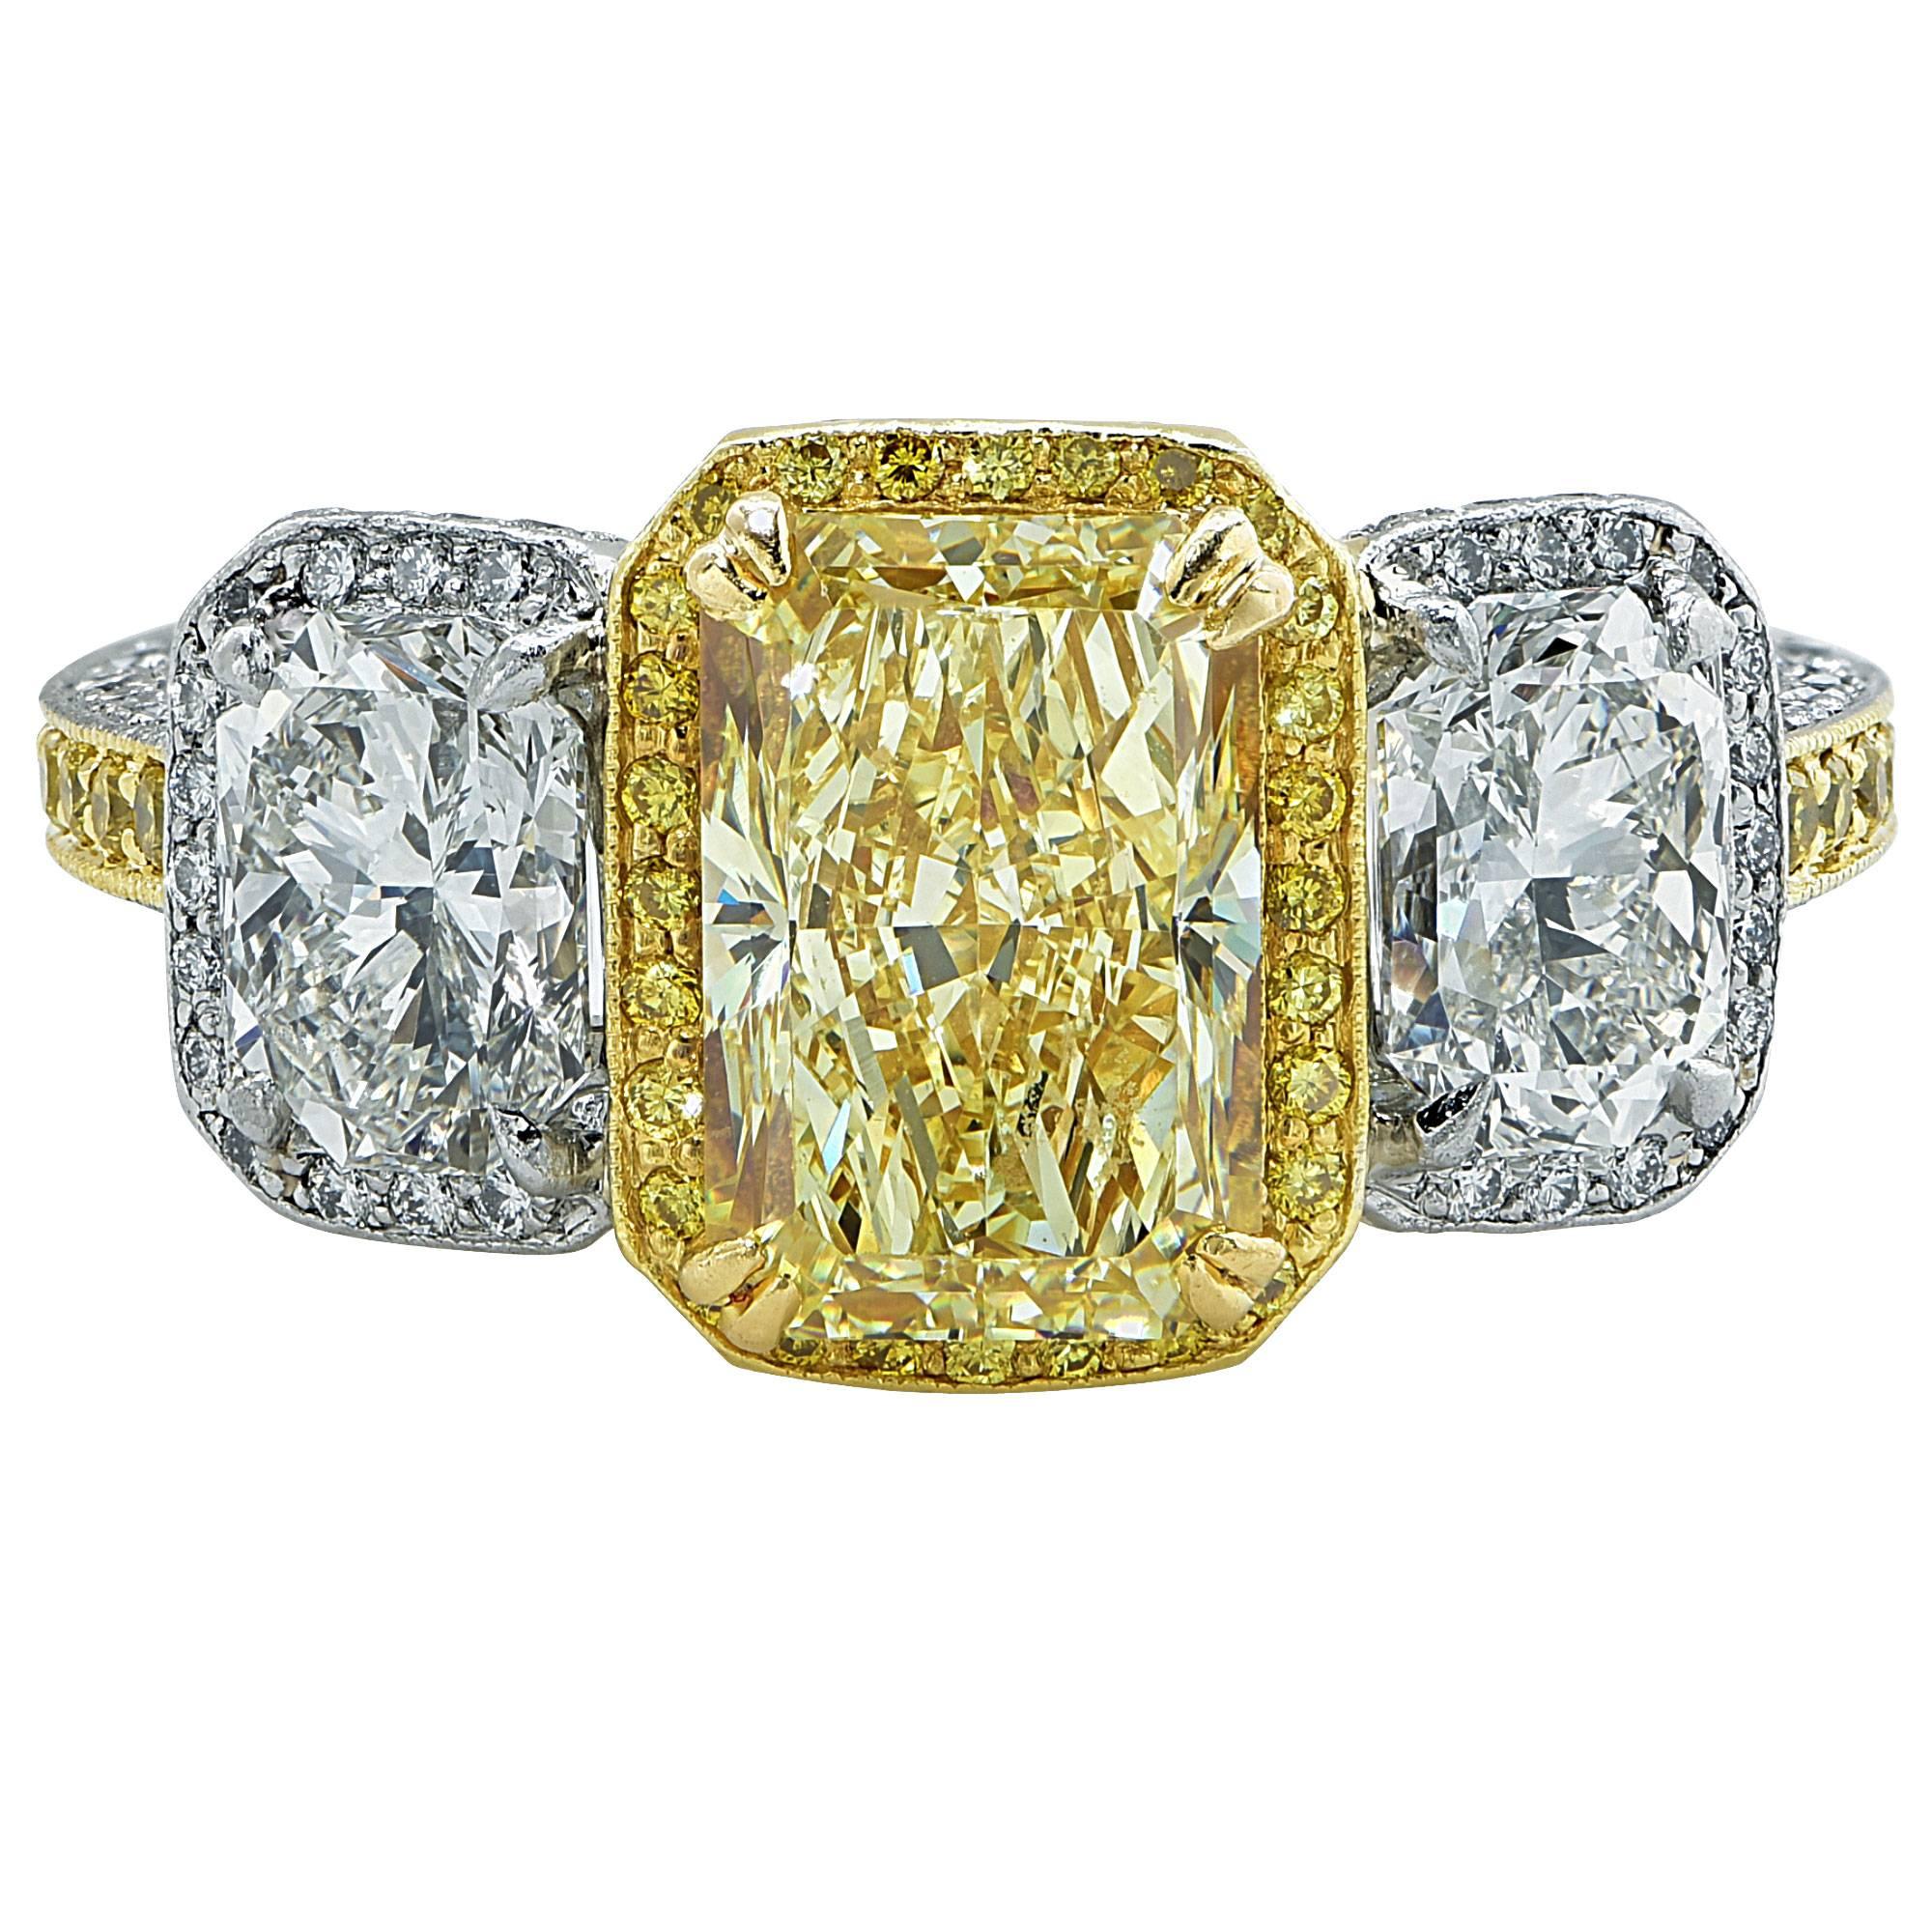 Platinum and 18k yellow gold ring featuring a 3.05ct radiant cut diamond natural fancy yellow VS1 clarity GIA, flanked by 2 radiant cut diamonds weighing approximately 2.70cts total E-F color VS1-2 clarity, accented by 182 round brilliant cut fancy